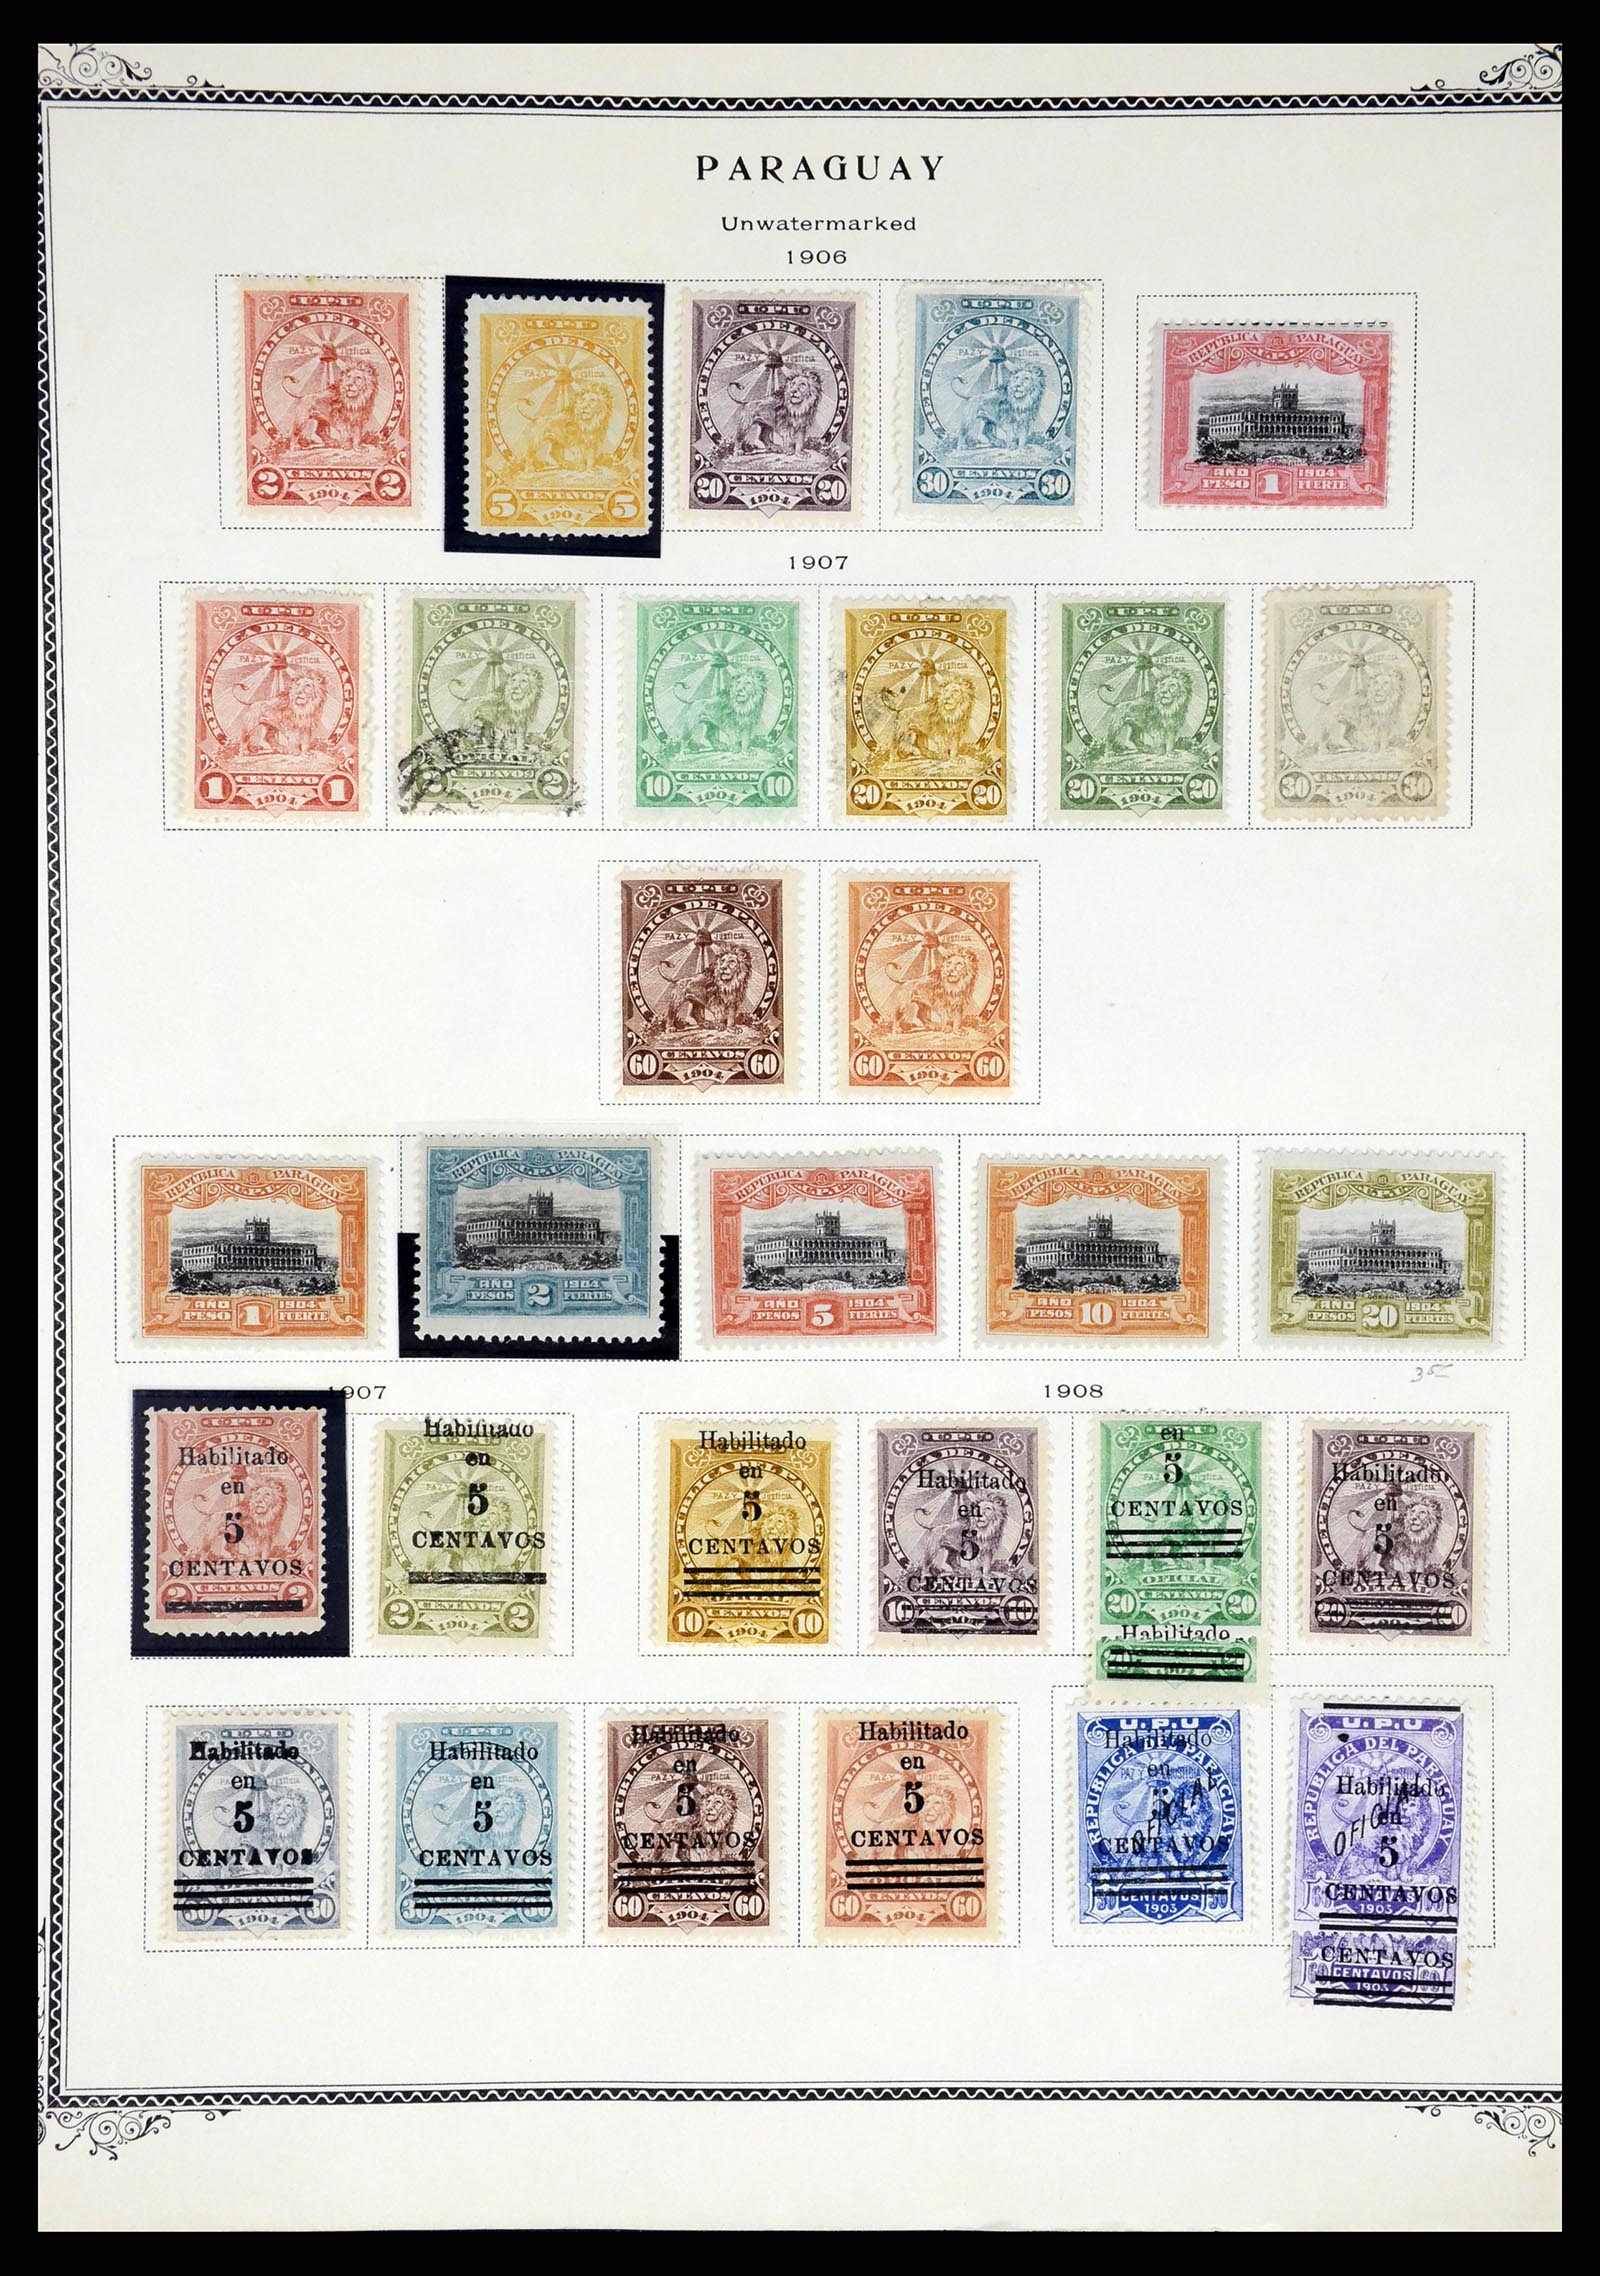 37227 010 - Stamp collection 37227 Paraguay 1870-2000.